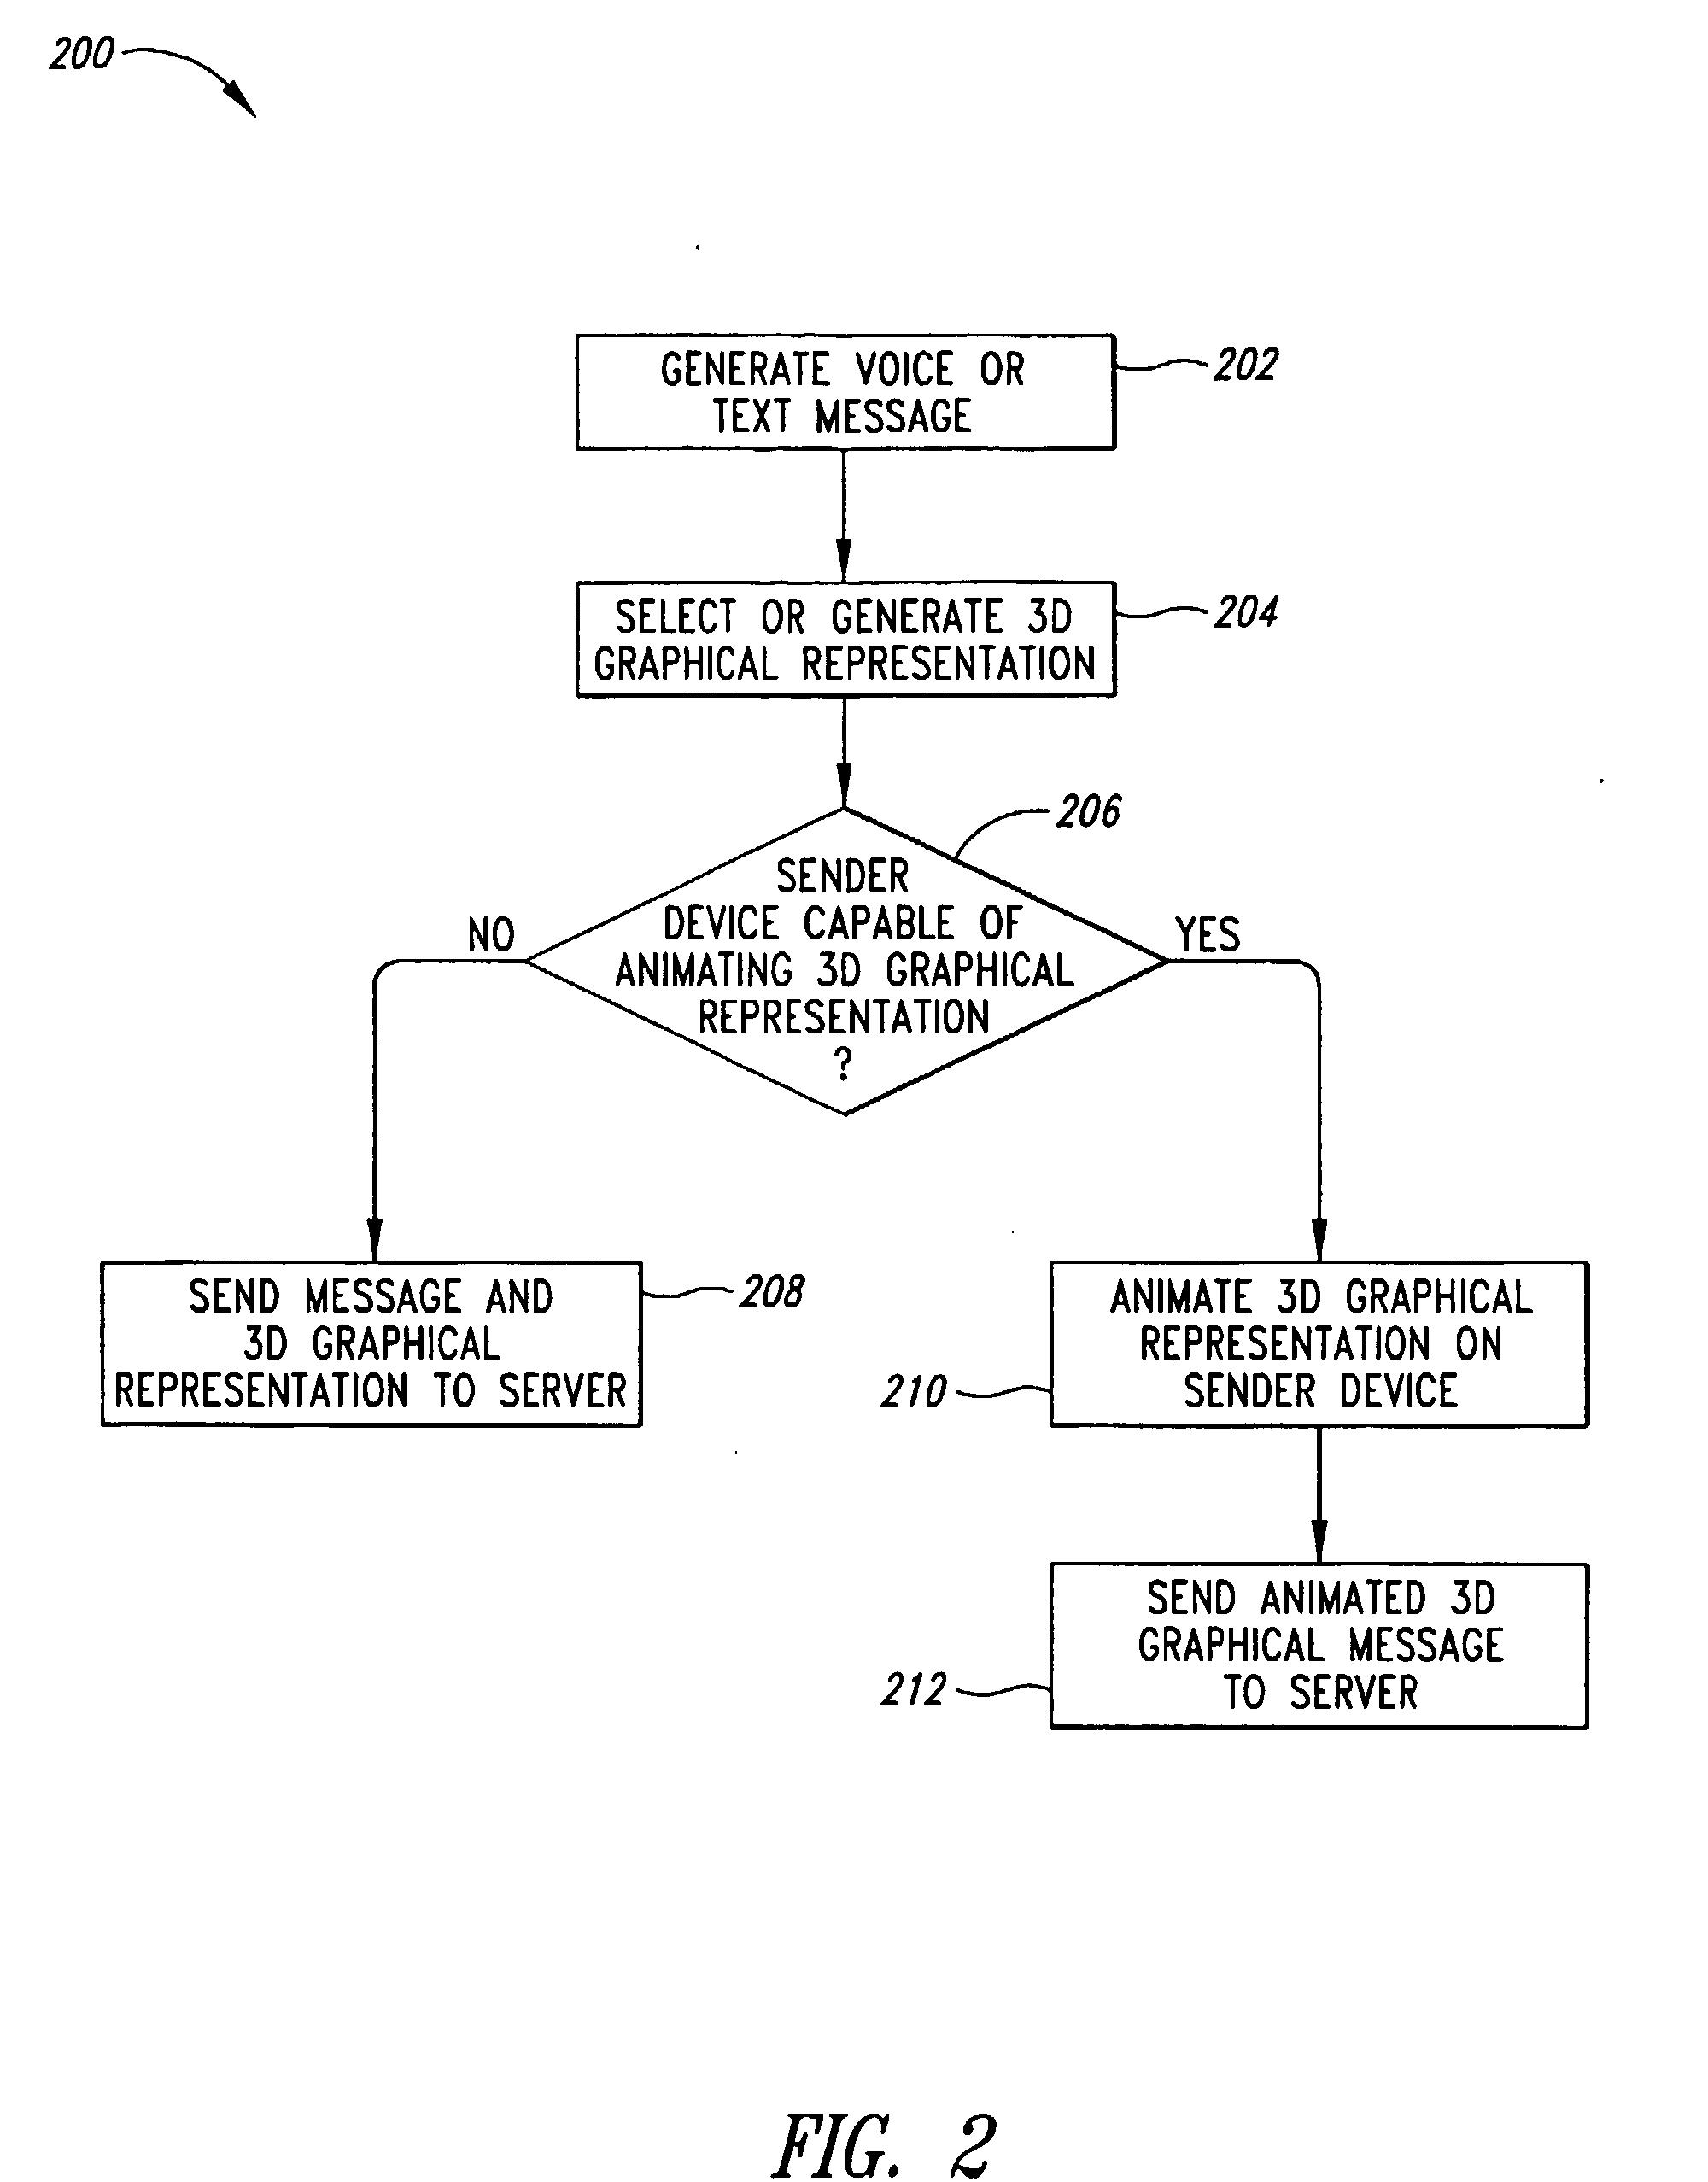 System and Method For Mobile 3D Graphical Messaging